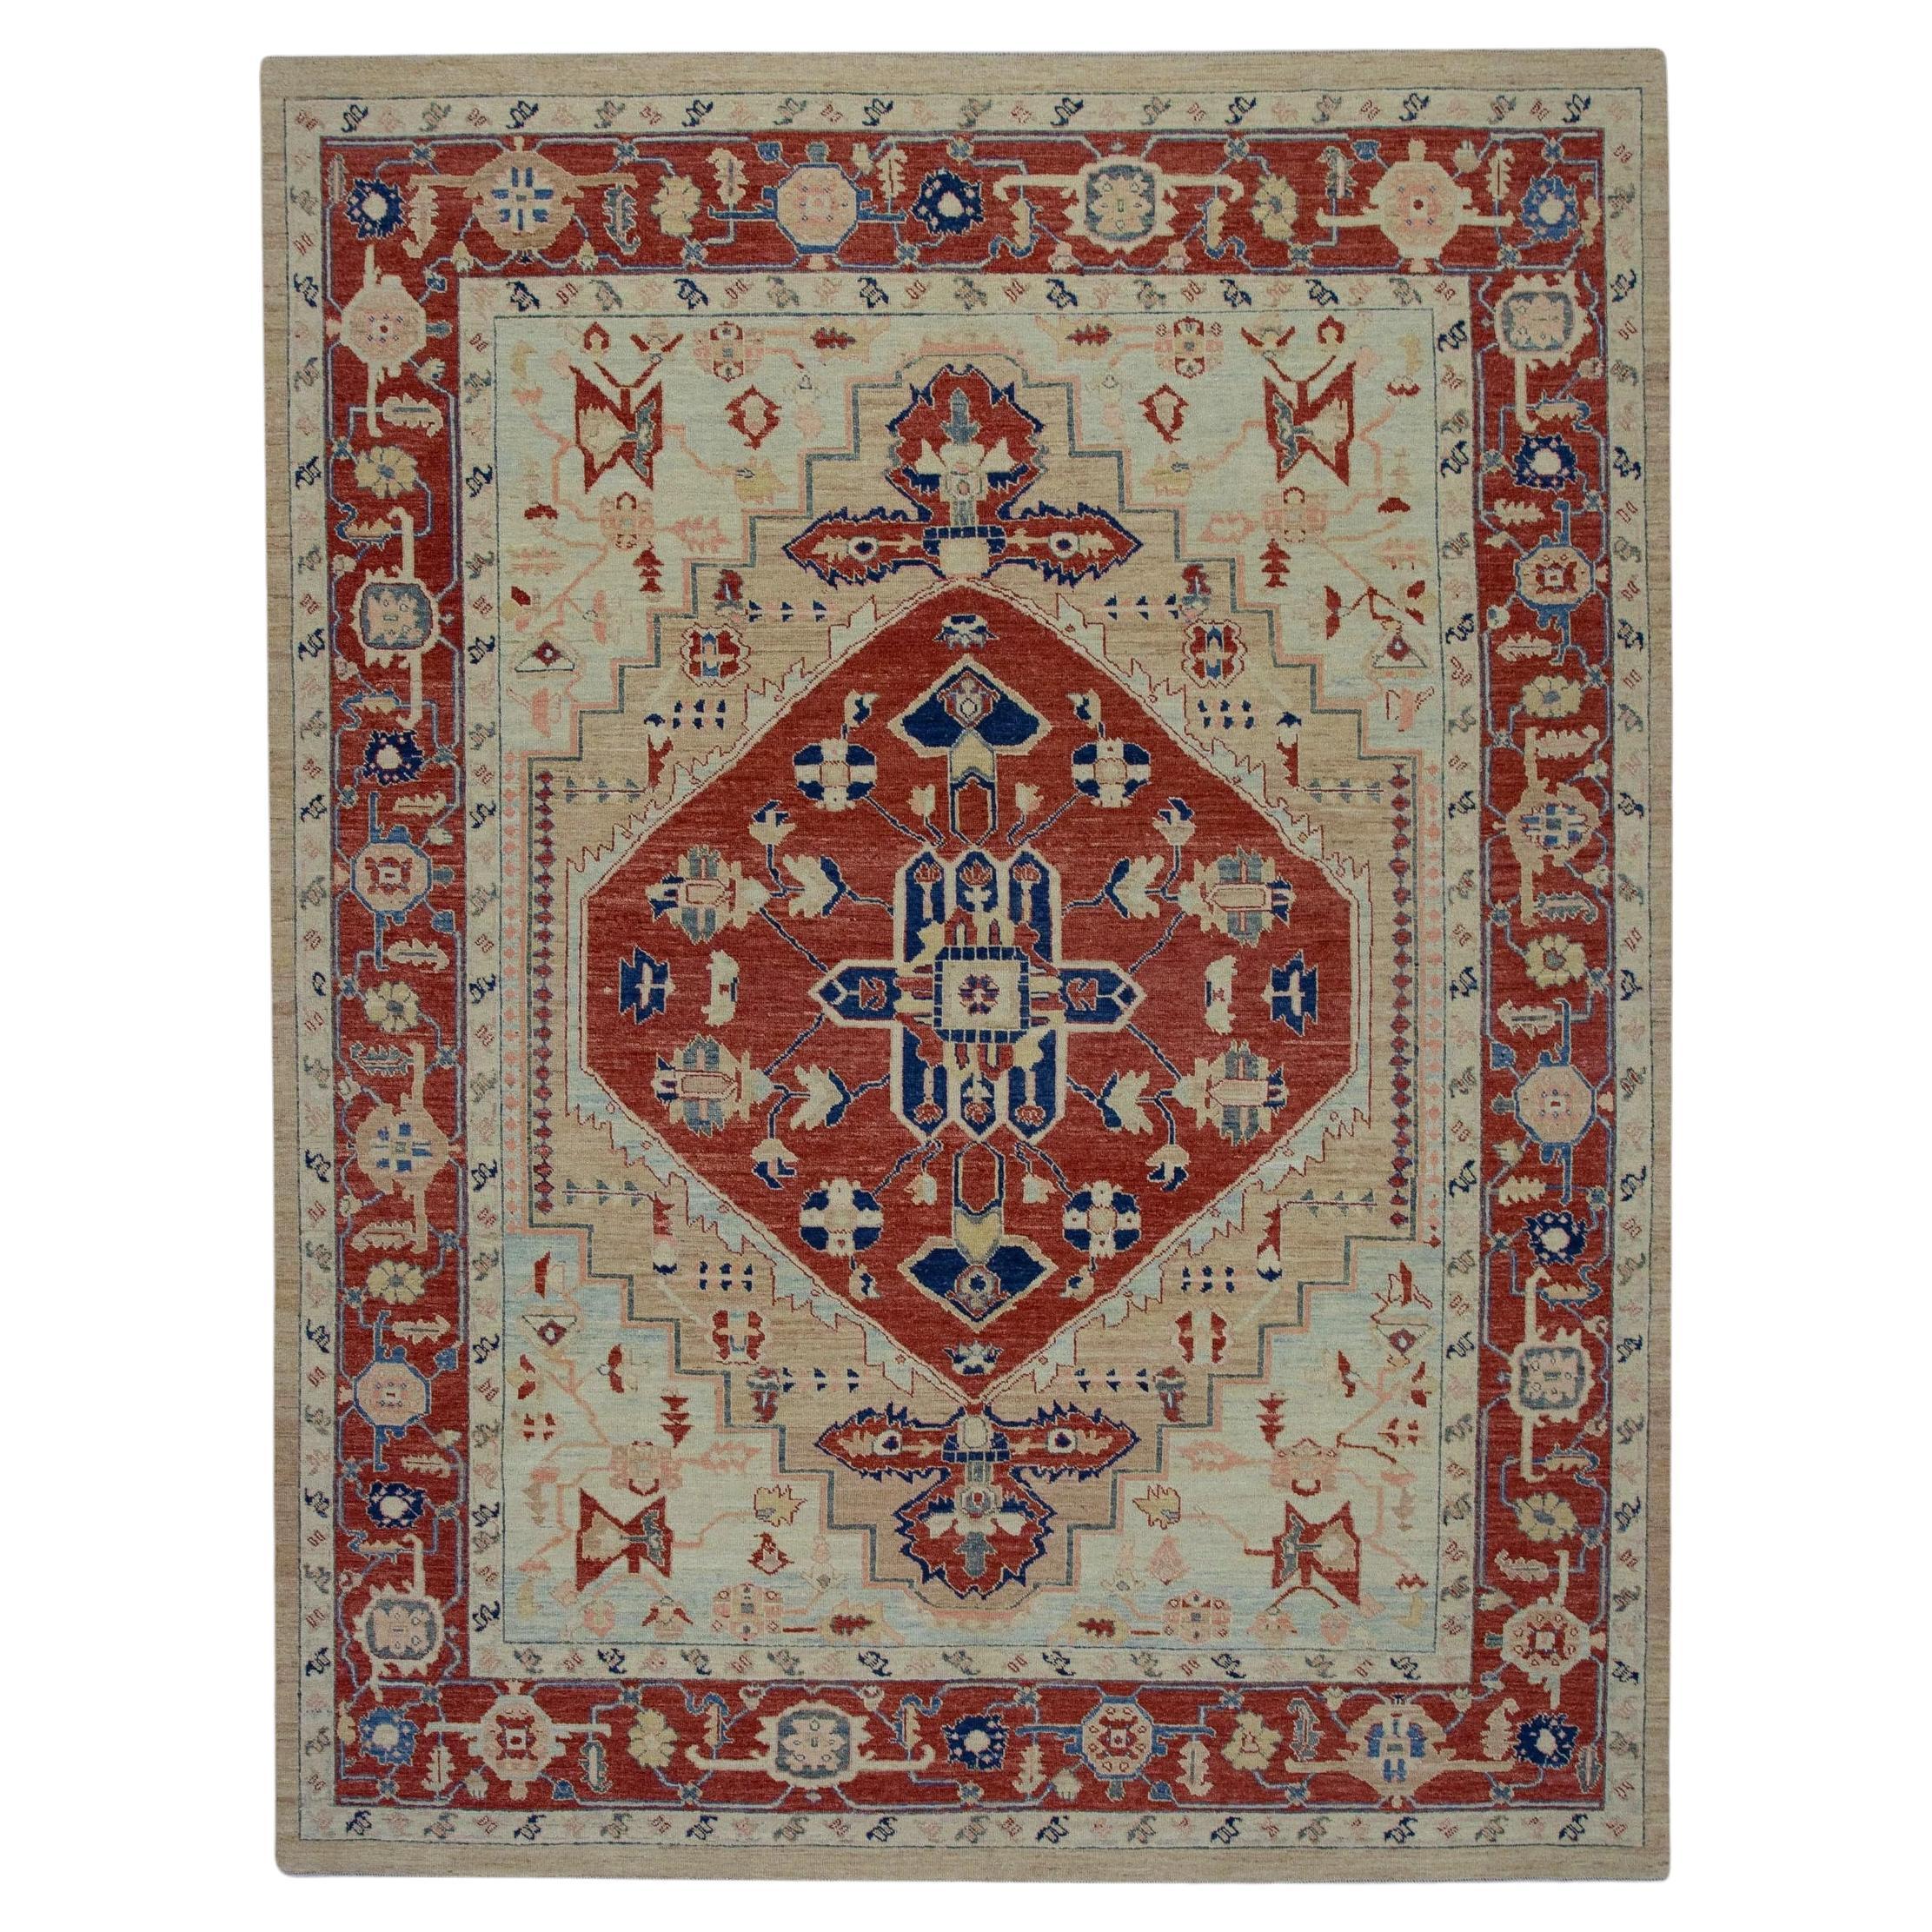 Floral Turkish Finewoven Wool Oushak Rug in Bright Red and Blue 7'10" x 10' For Sale